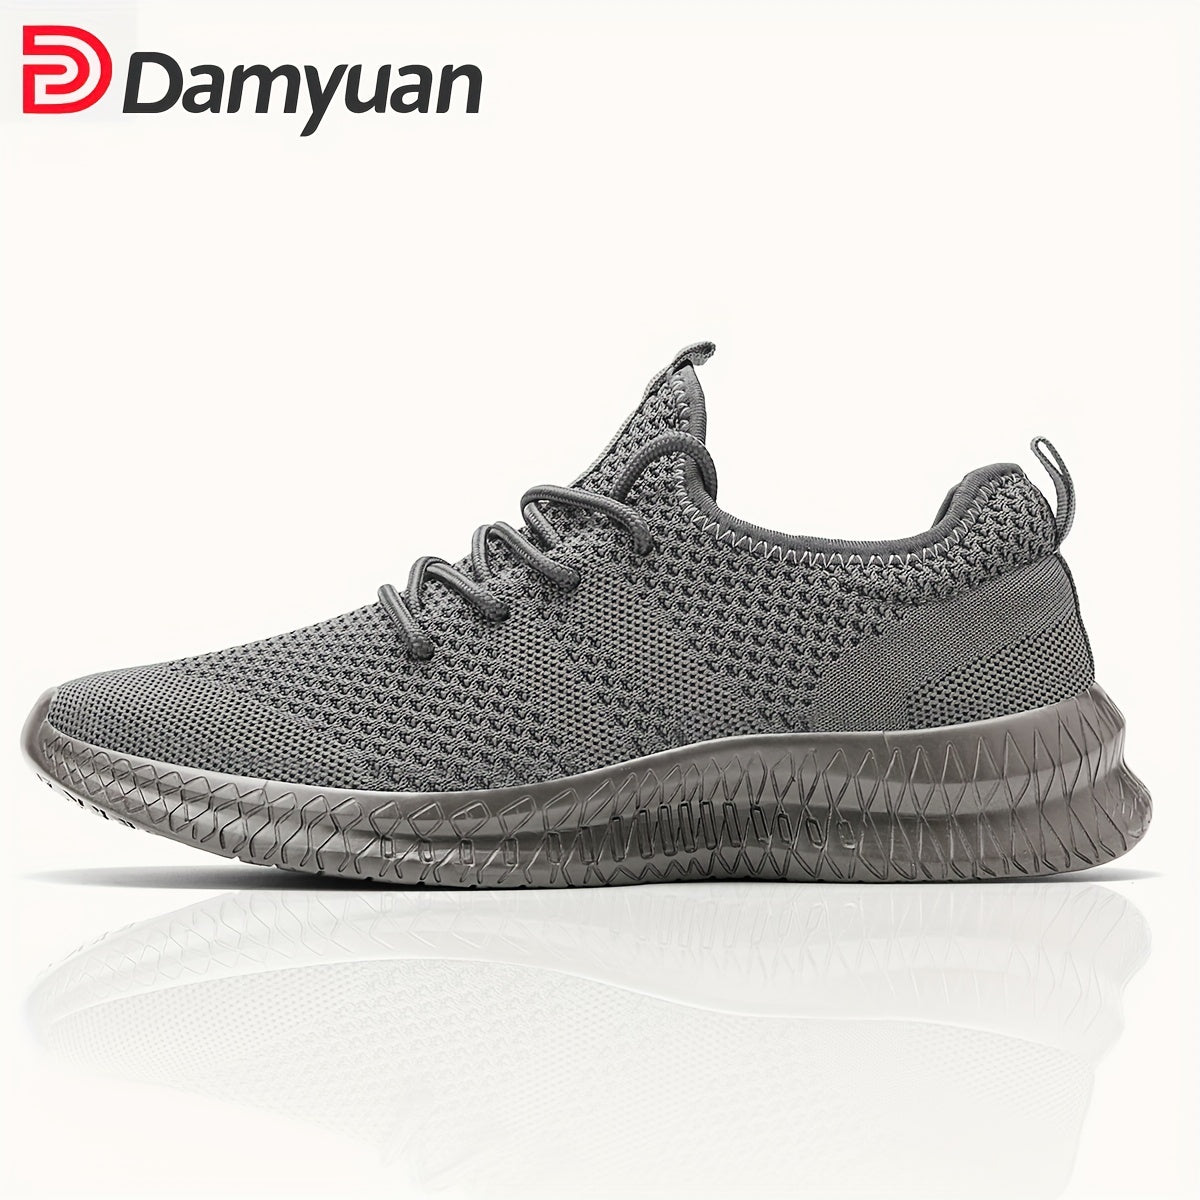 Men's Casual Solid Color Breathable Mesh Shoes, Outdoor Anti-skid Lace-up Walking Sneakers